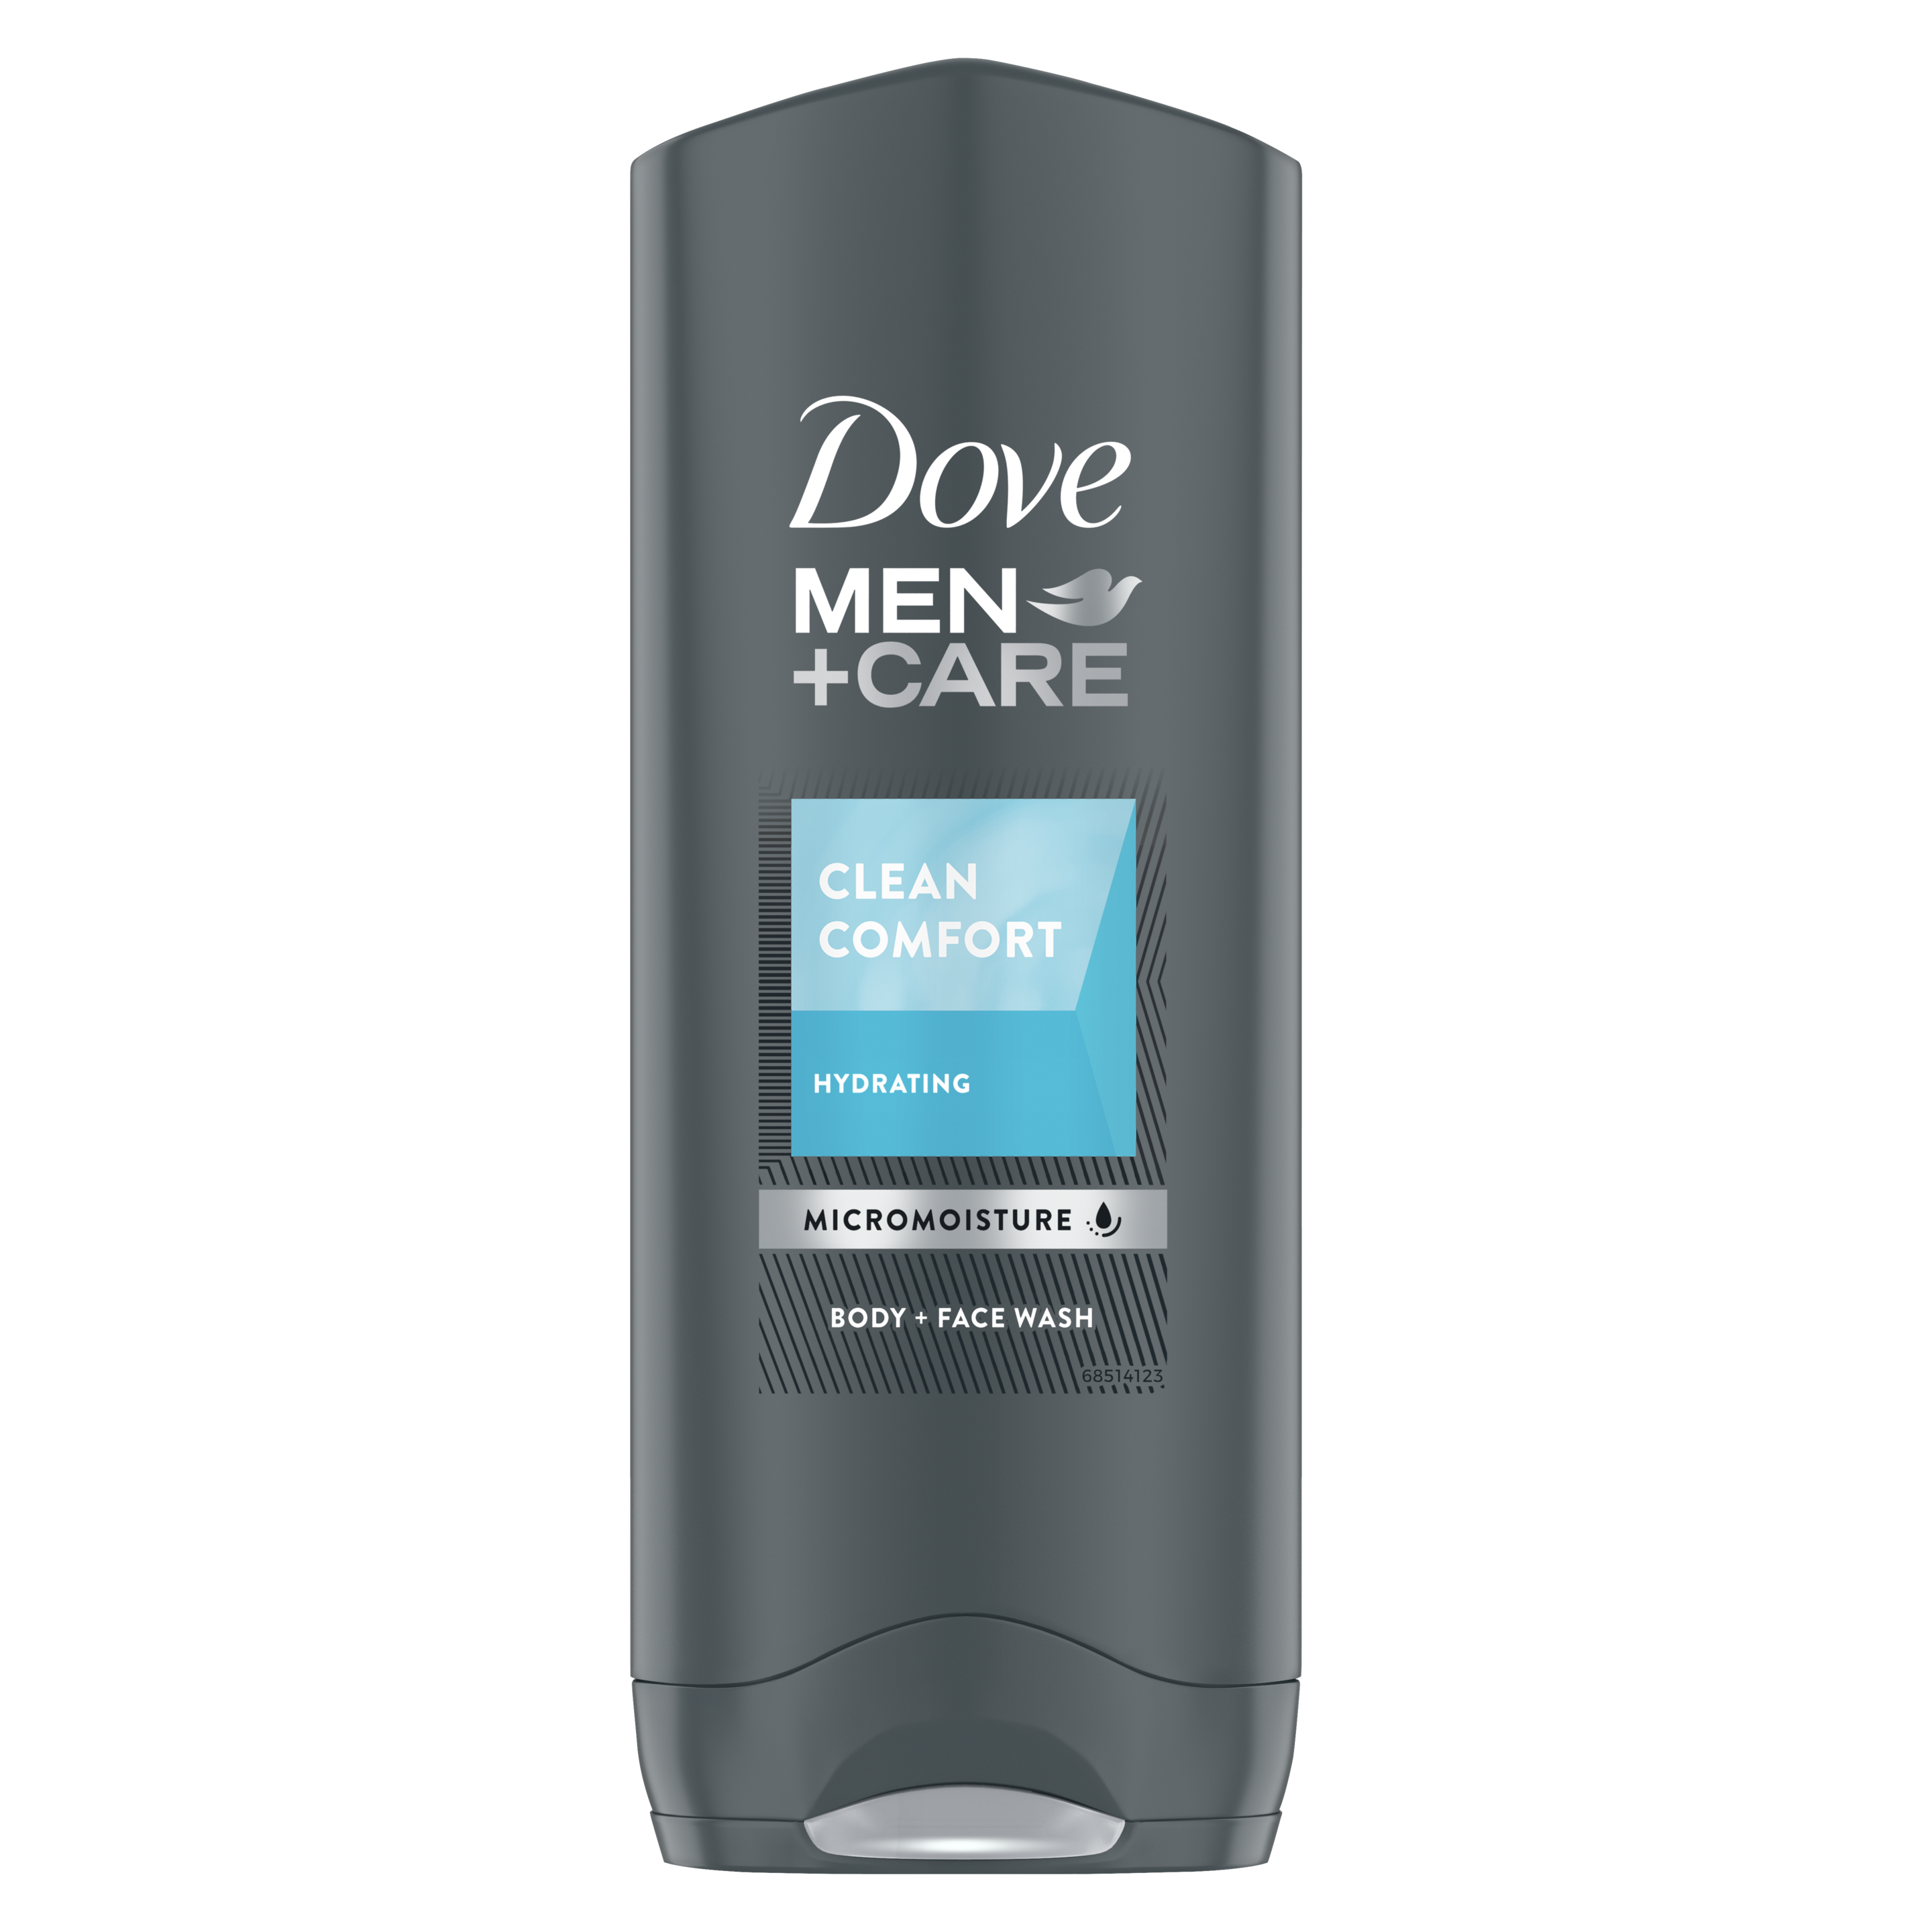 Dove Men+Care Clean Comfort body and face wash 250ml